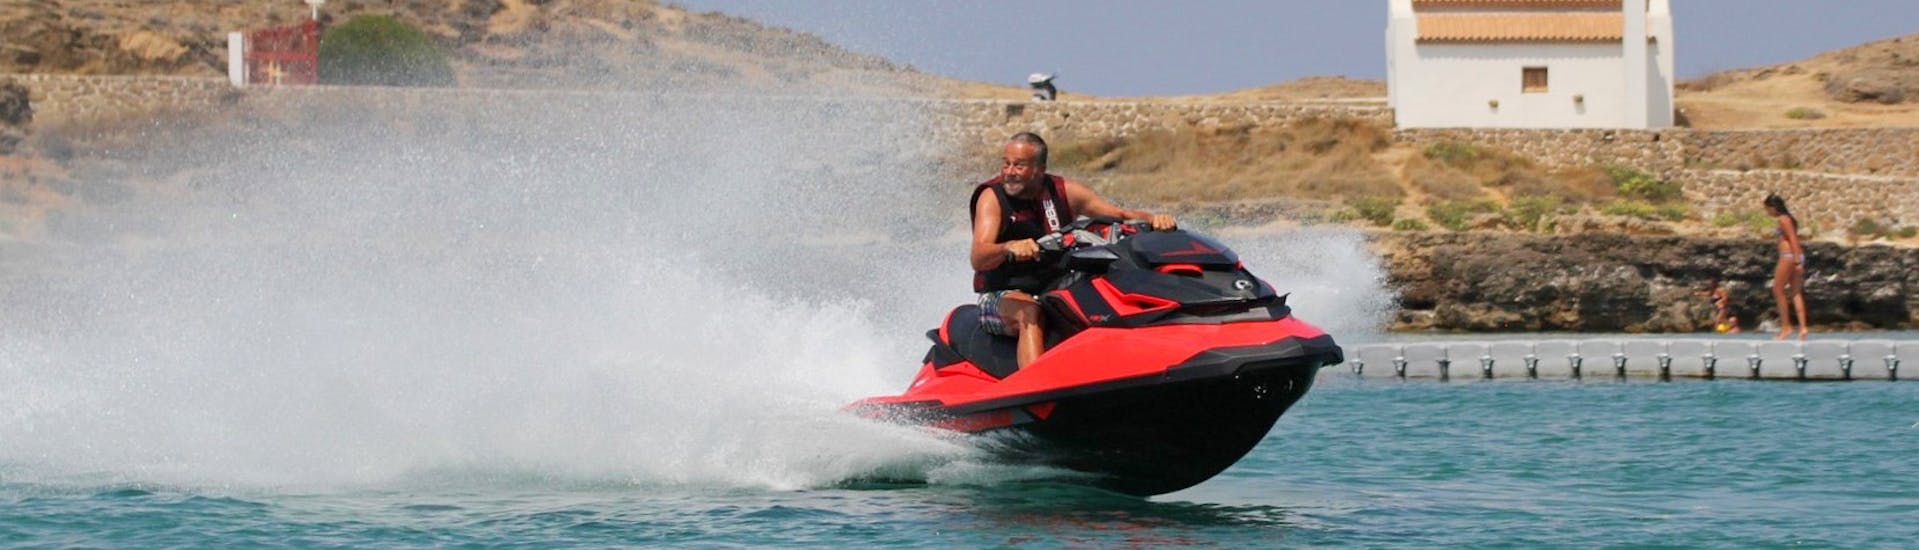 Man rides towards the camera laughing on a jet ski rented from St. Nicholas Beach Watersports.